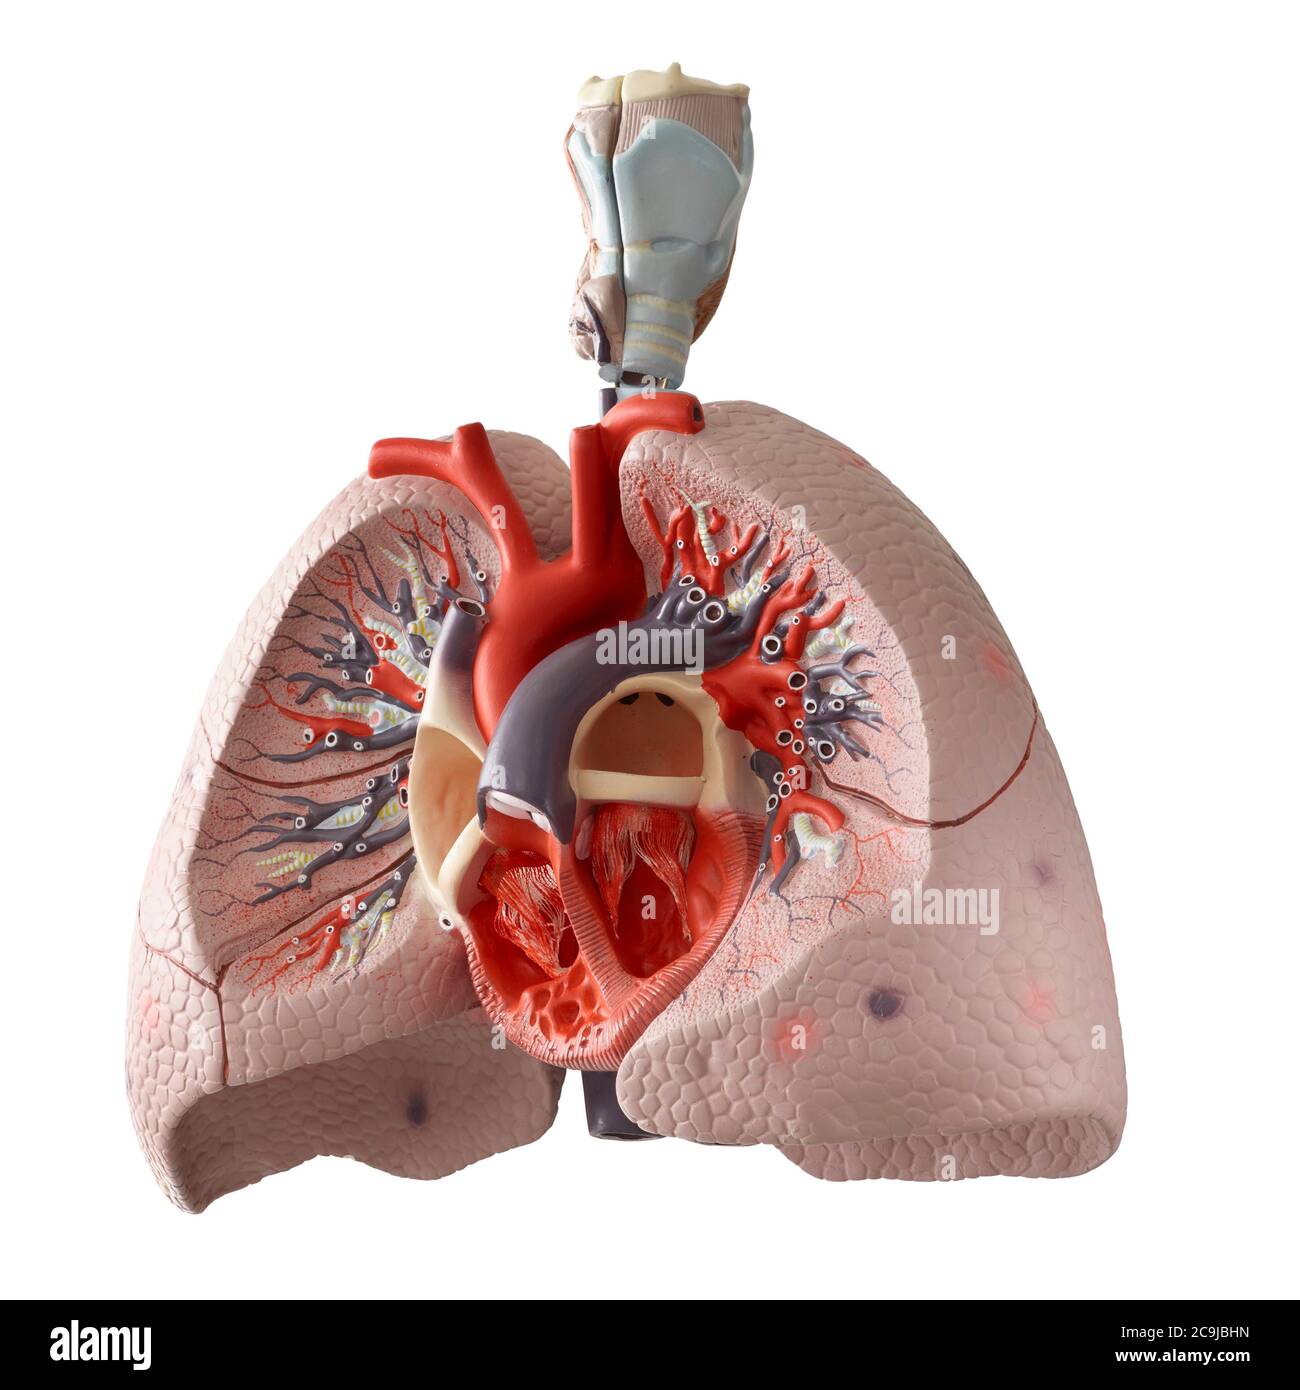 Anatomical model of the internal organs. Stock Photo